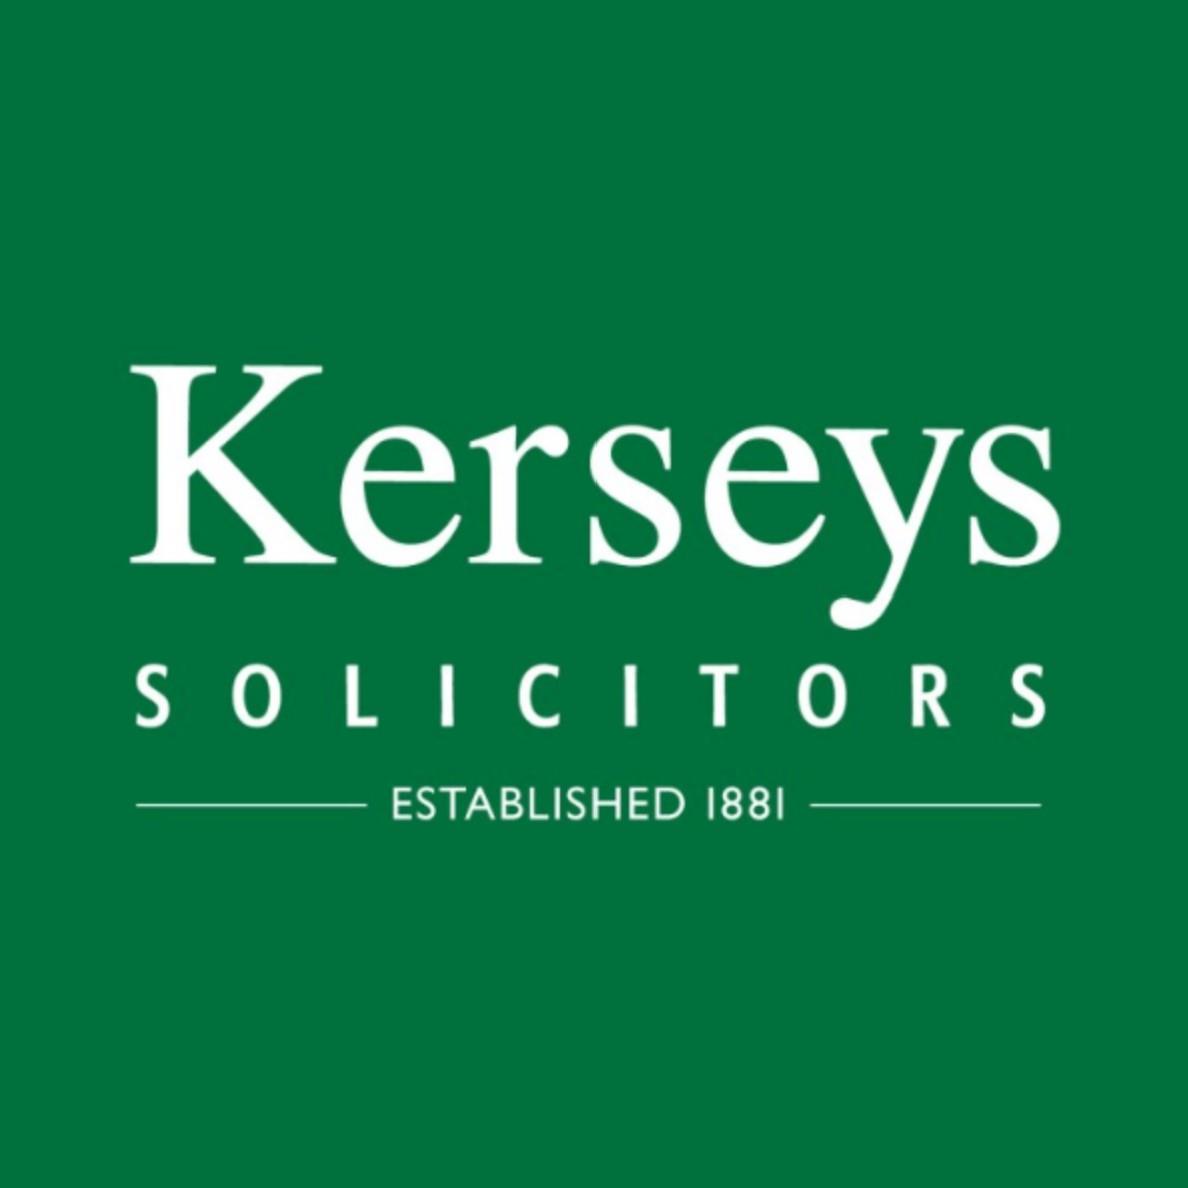 Kerseys Select Zylpha's Smartsearch Integration For Anti-Money Laundering Compliance